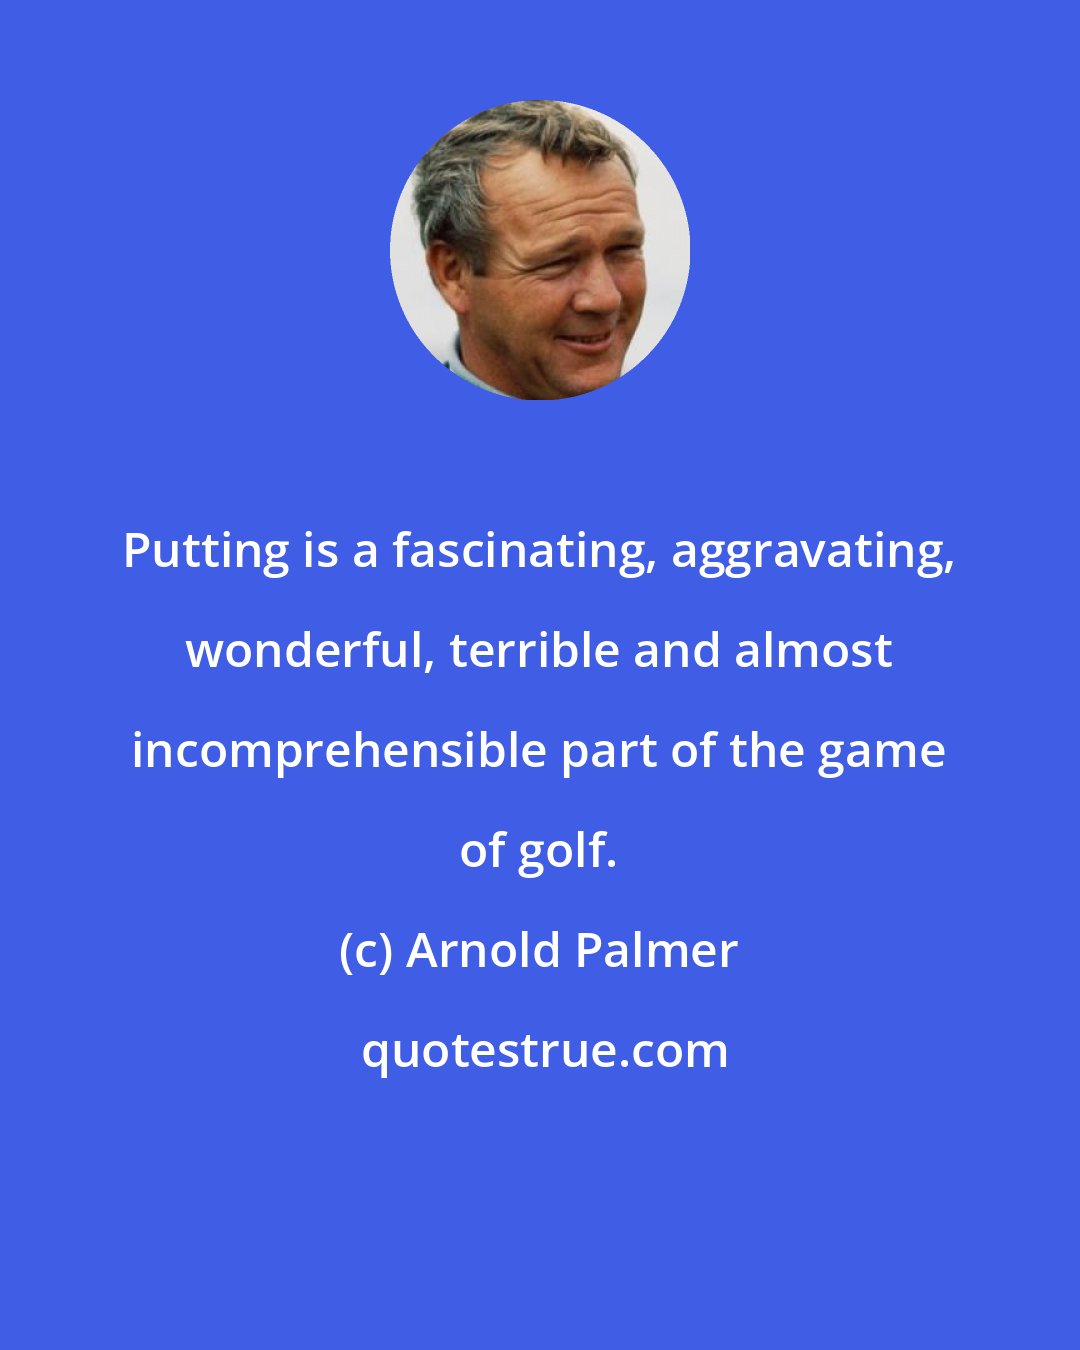 Arnold Palmer: Putting is a fascinating, aggravating, wonderful, terrible and almost incomprehensible part of the game of golf.